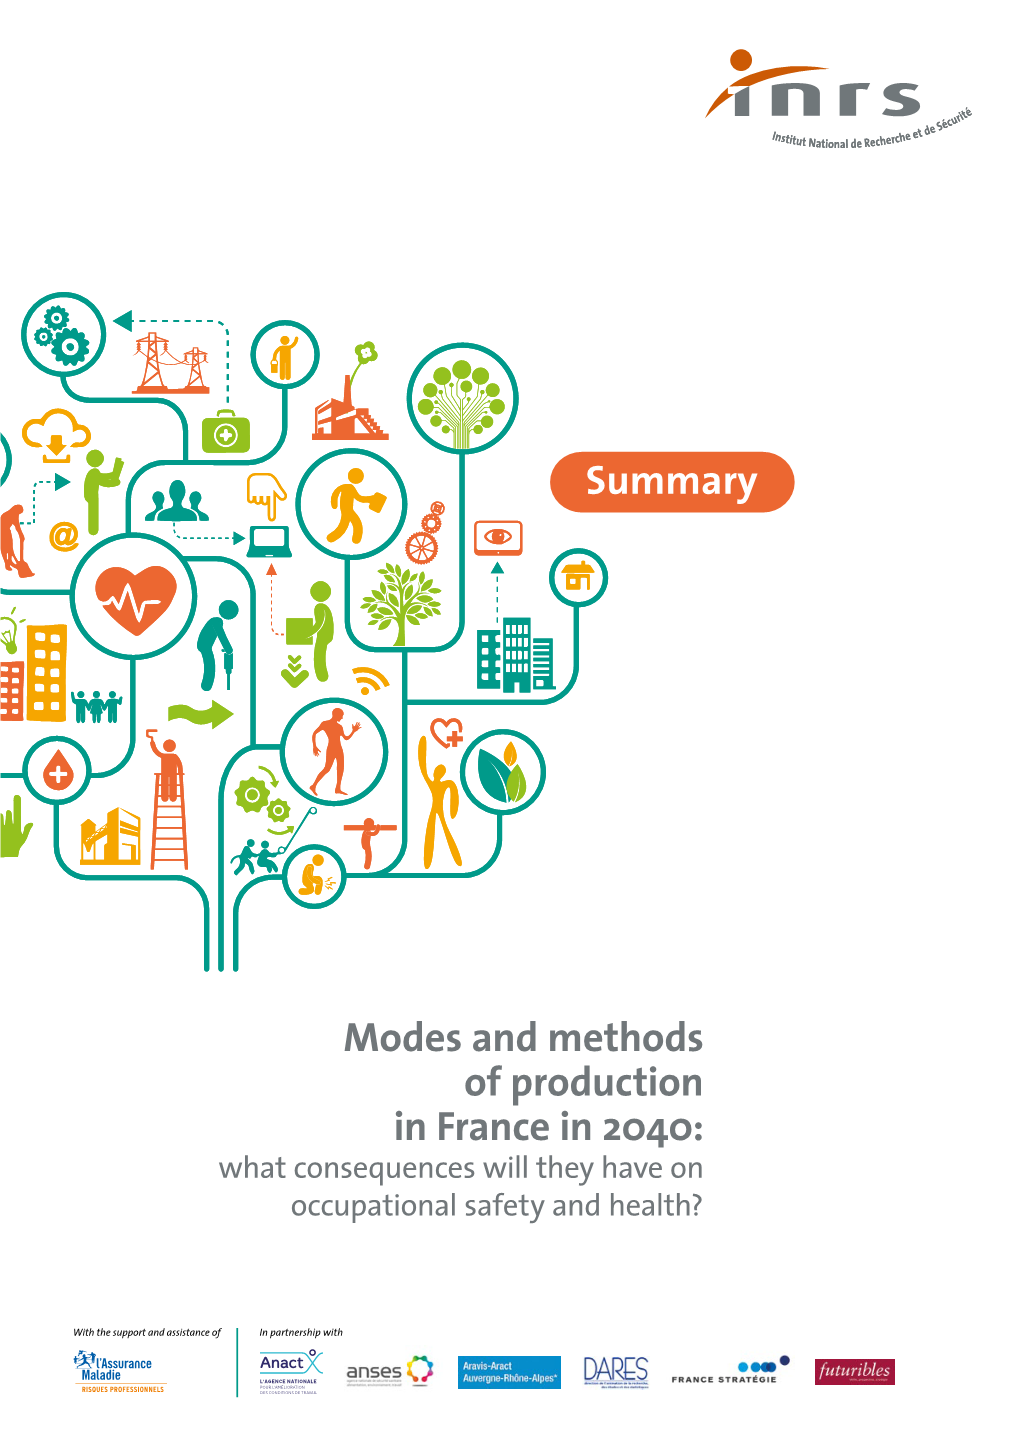 Modes and Methods of Production in France in 2040: What Consequences Will They Have on Occupational Safety and Health?